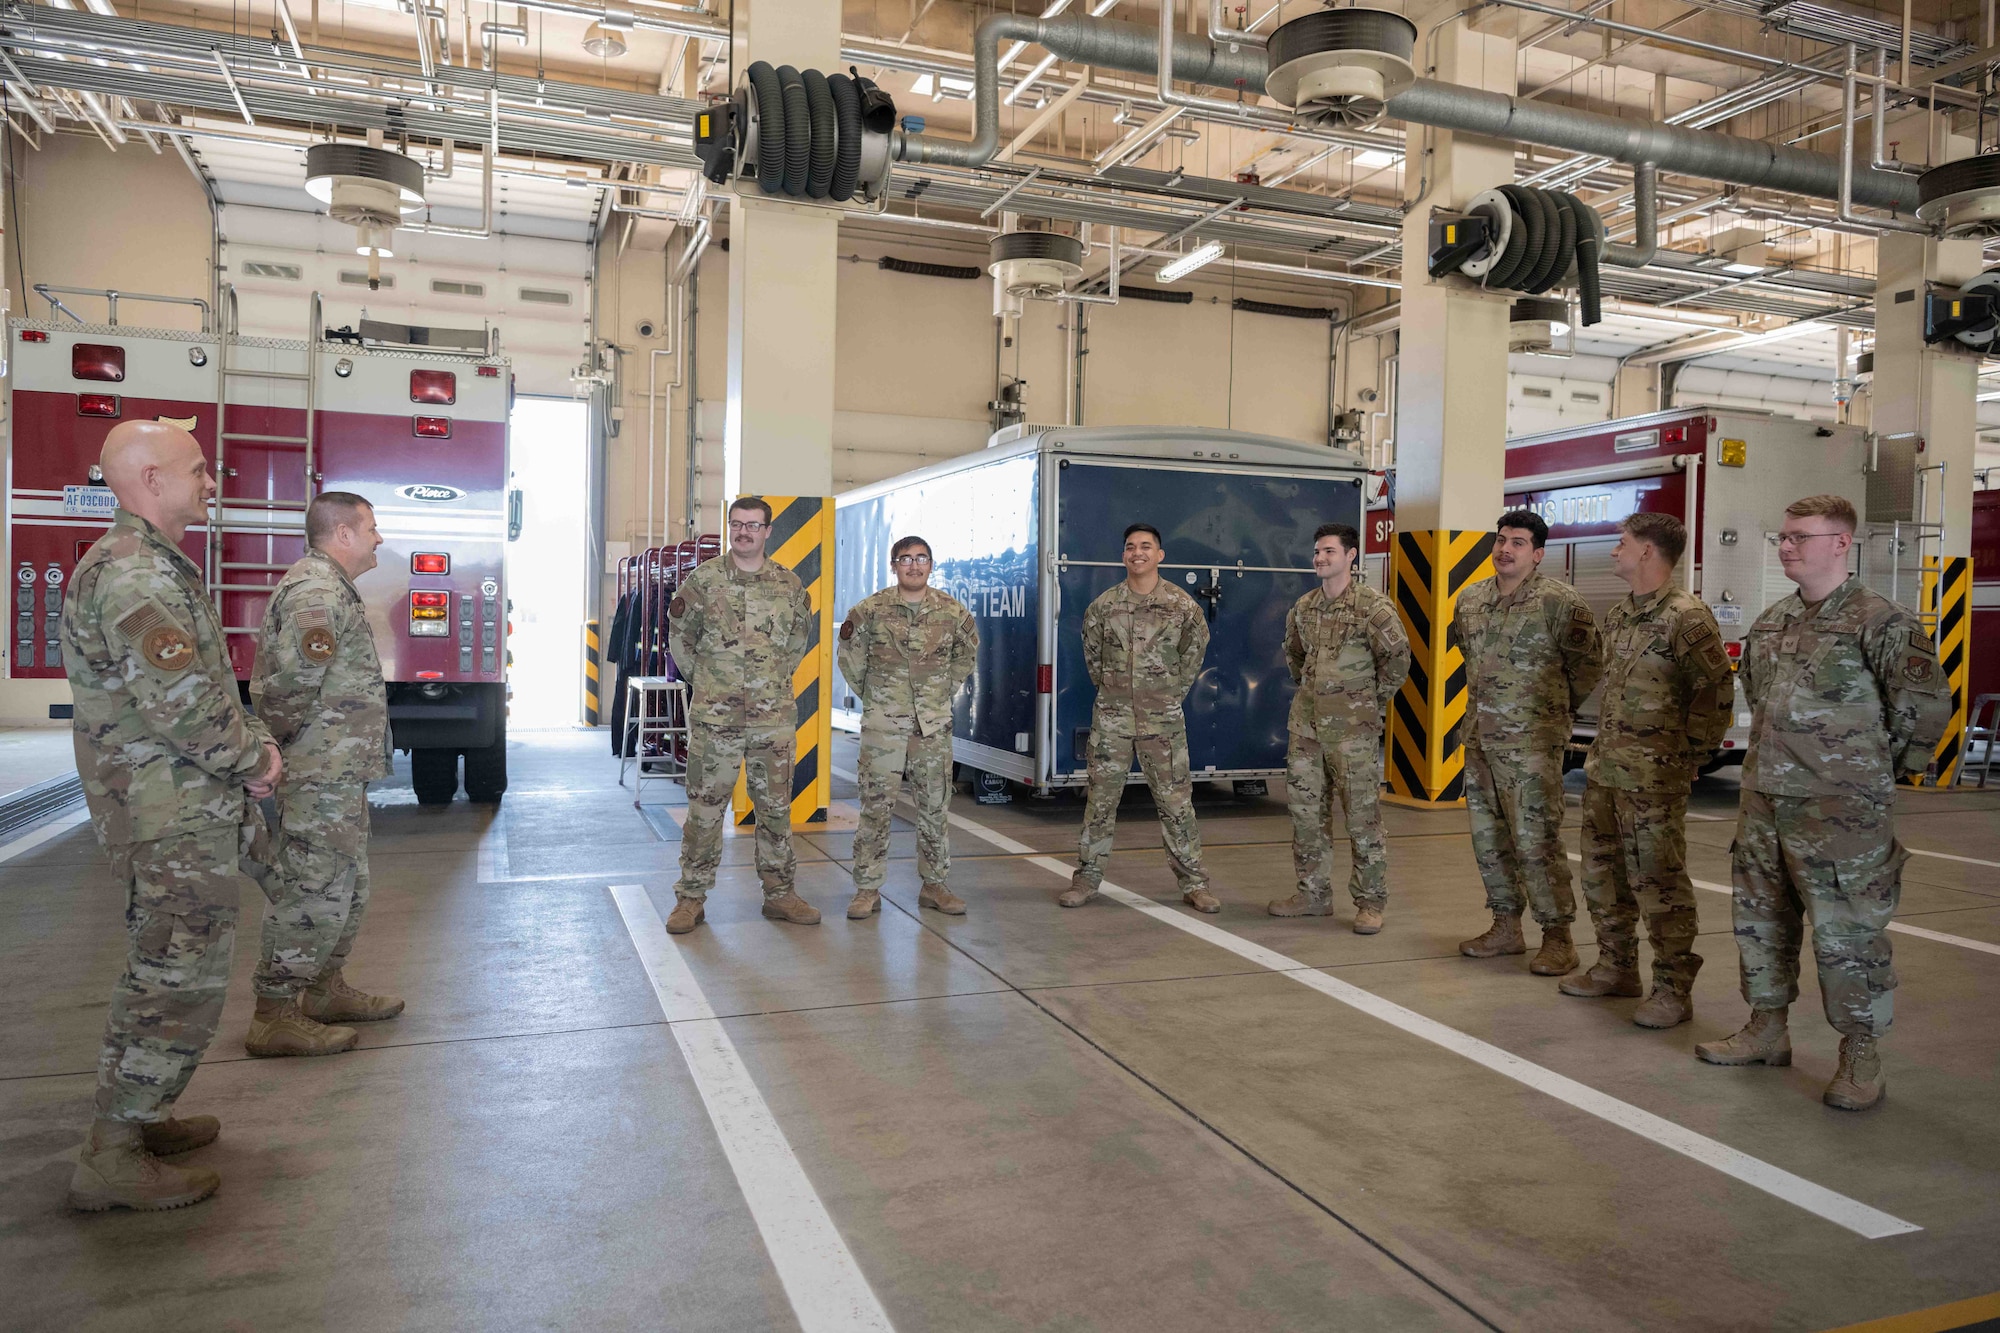 Military members talk to Airmen Firefighters in a garage.